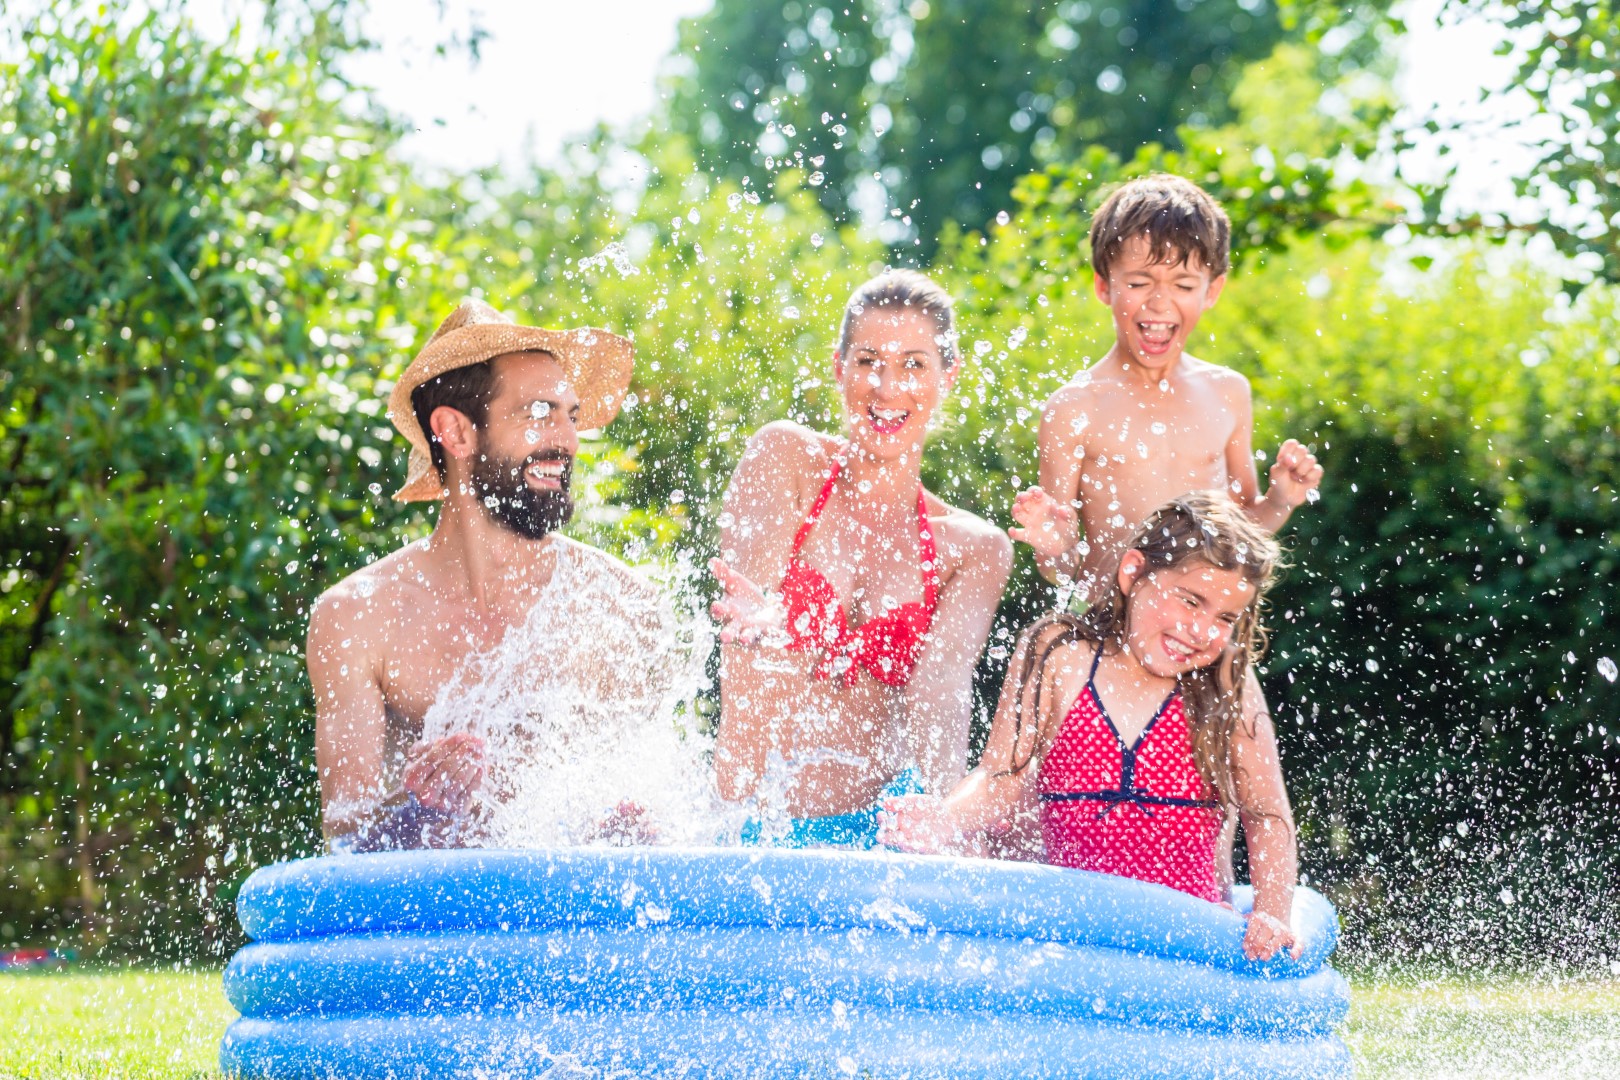 Did you know your inflatable pool could need a compliance certificate?